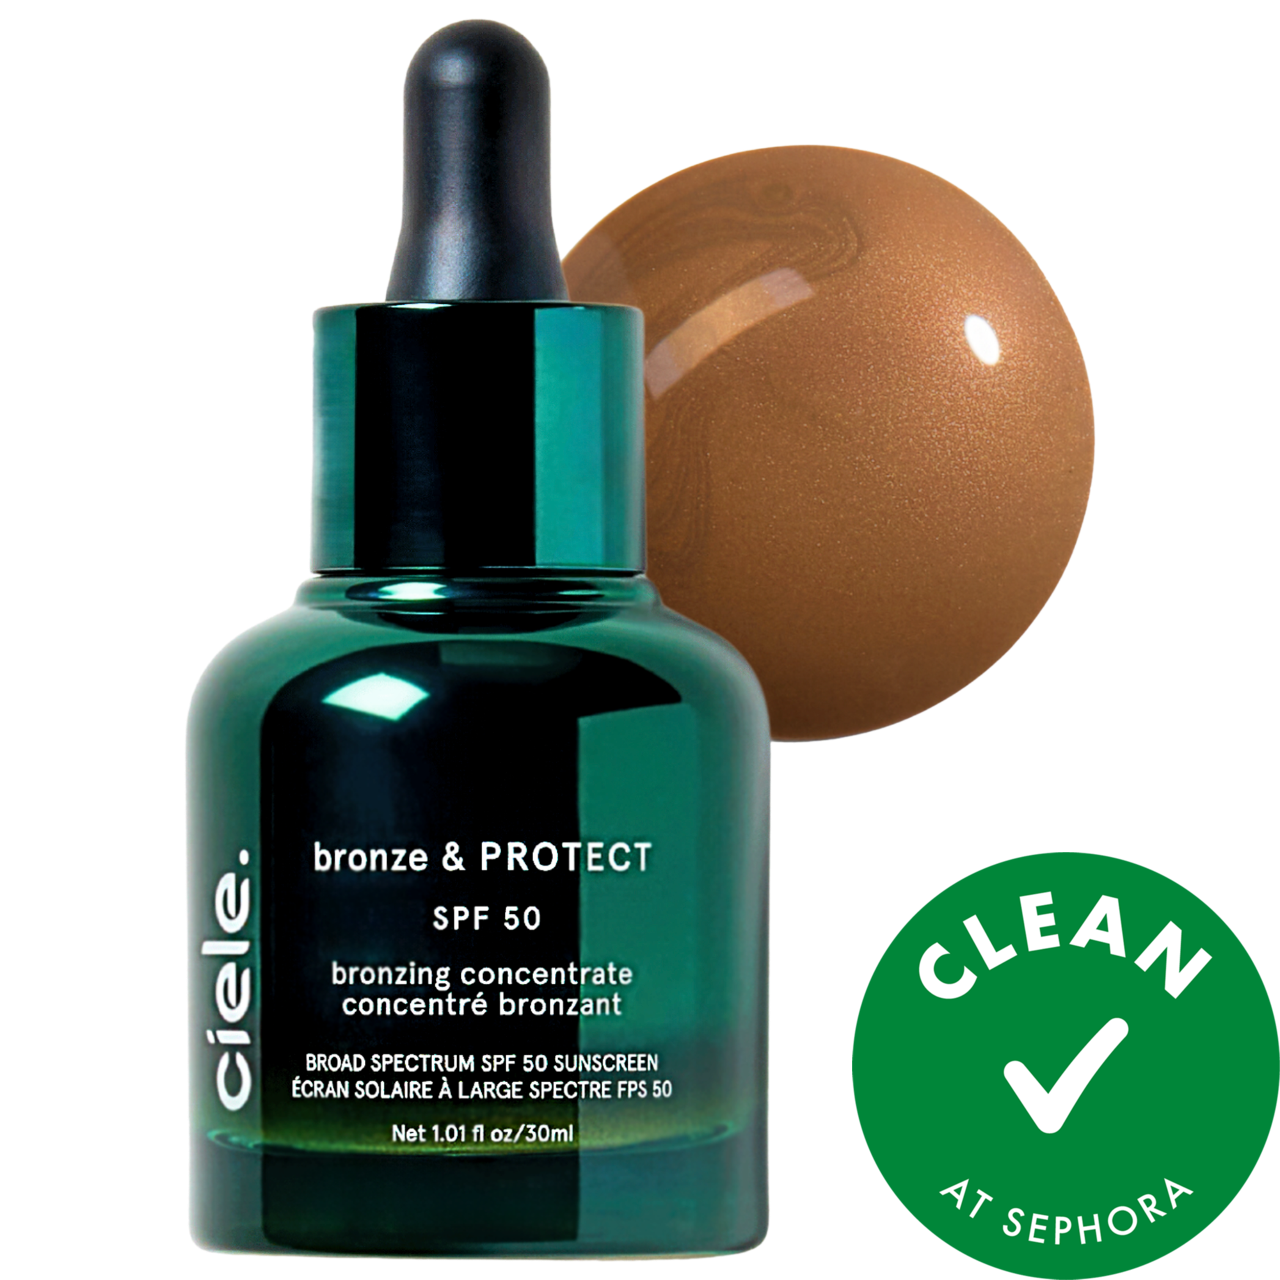 bronze & PROTECT SPF 50+ bronzing concentrate Ciele